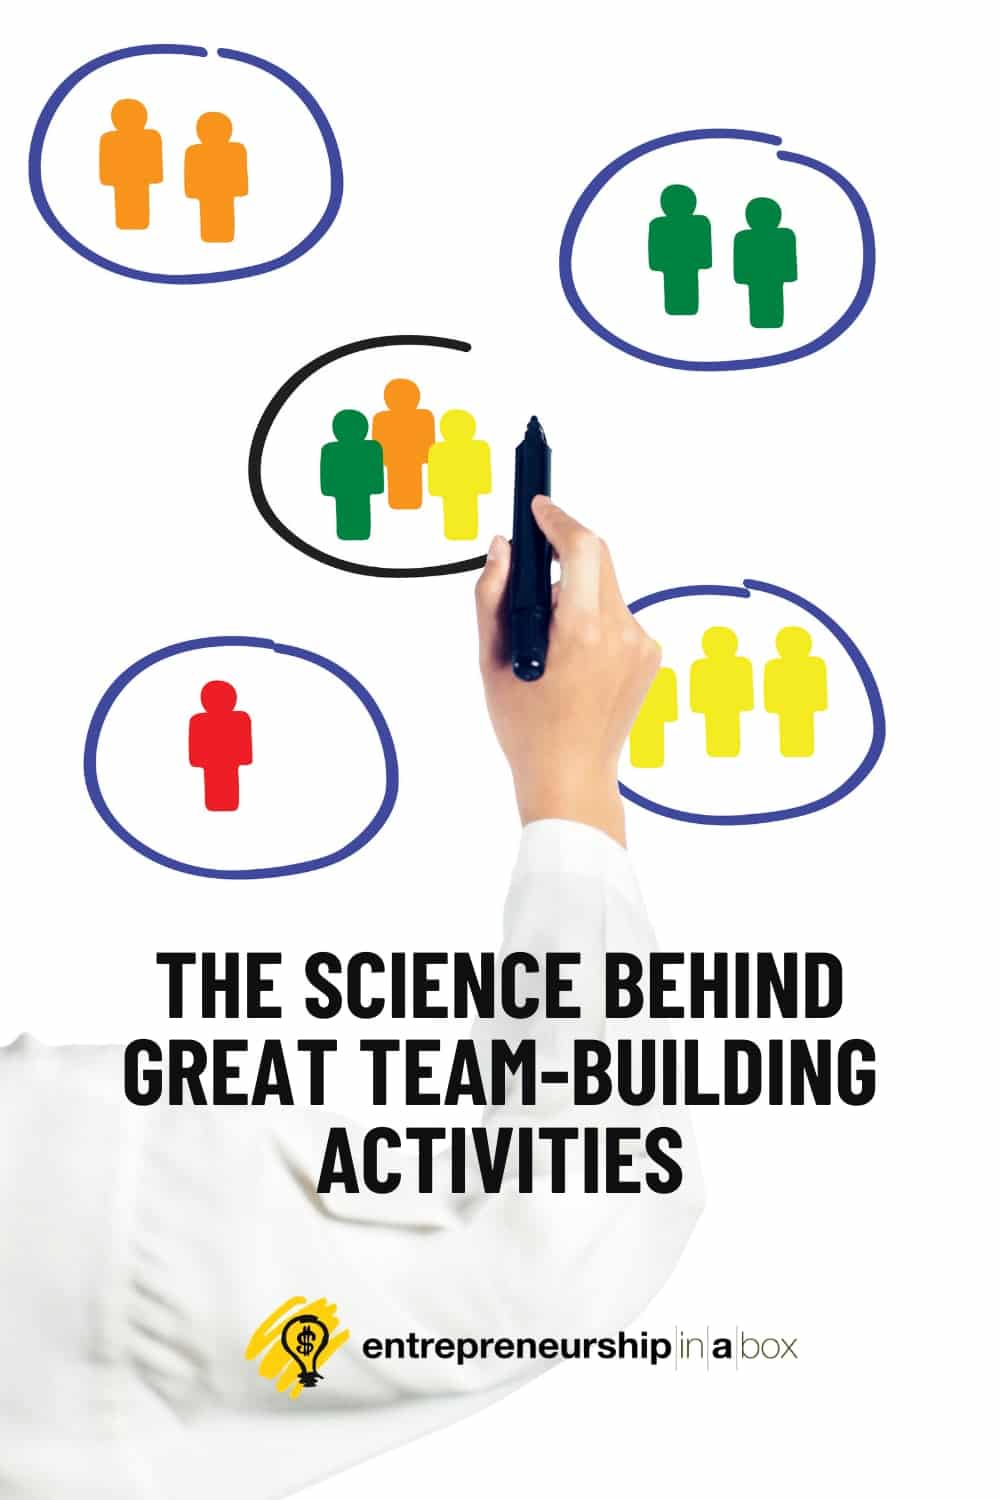 The Science Behind Great Team-Building Activities